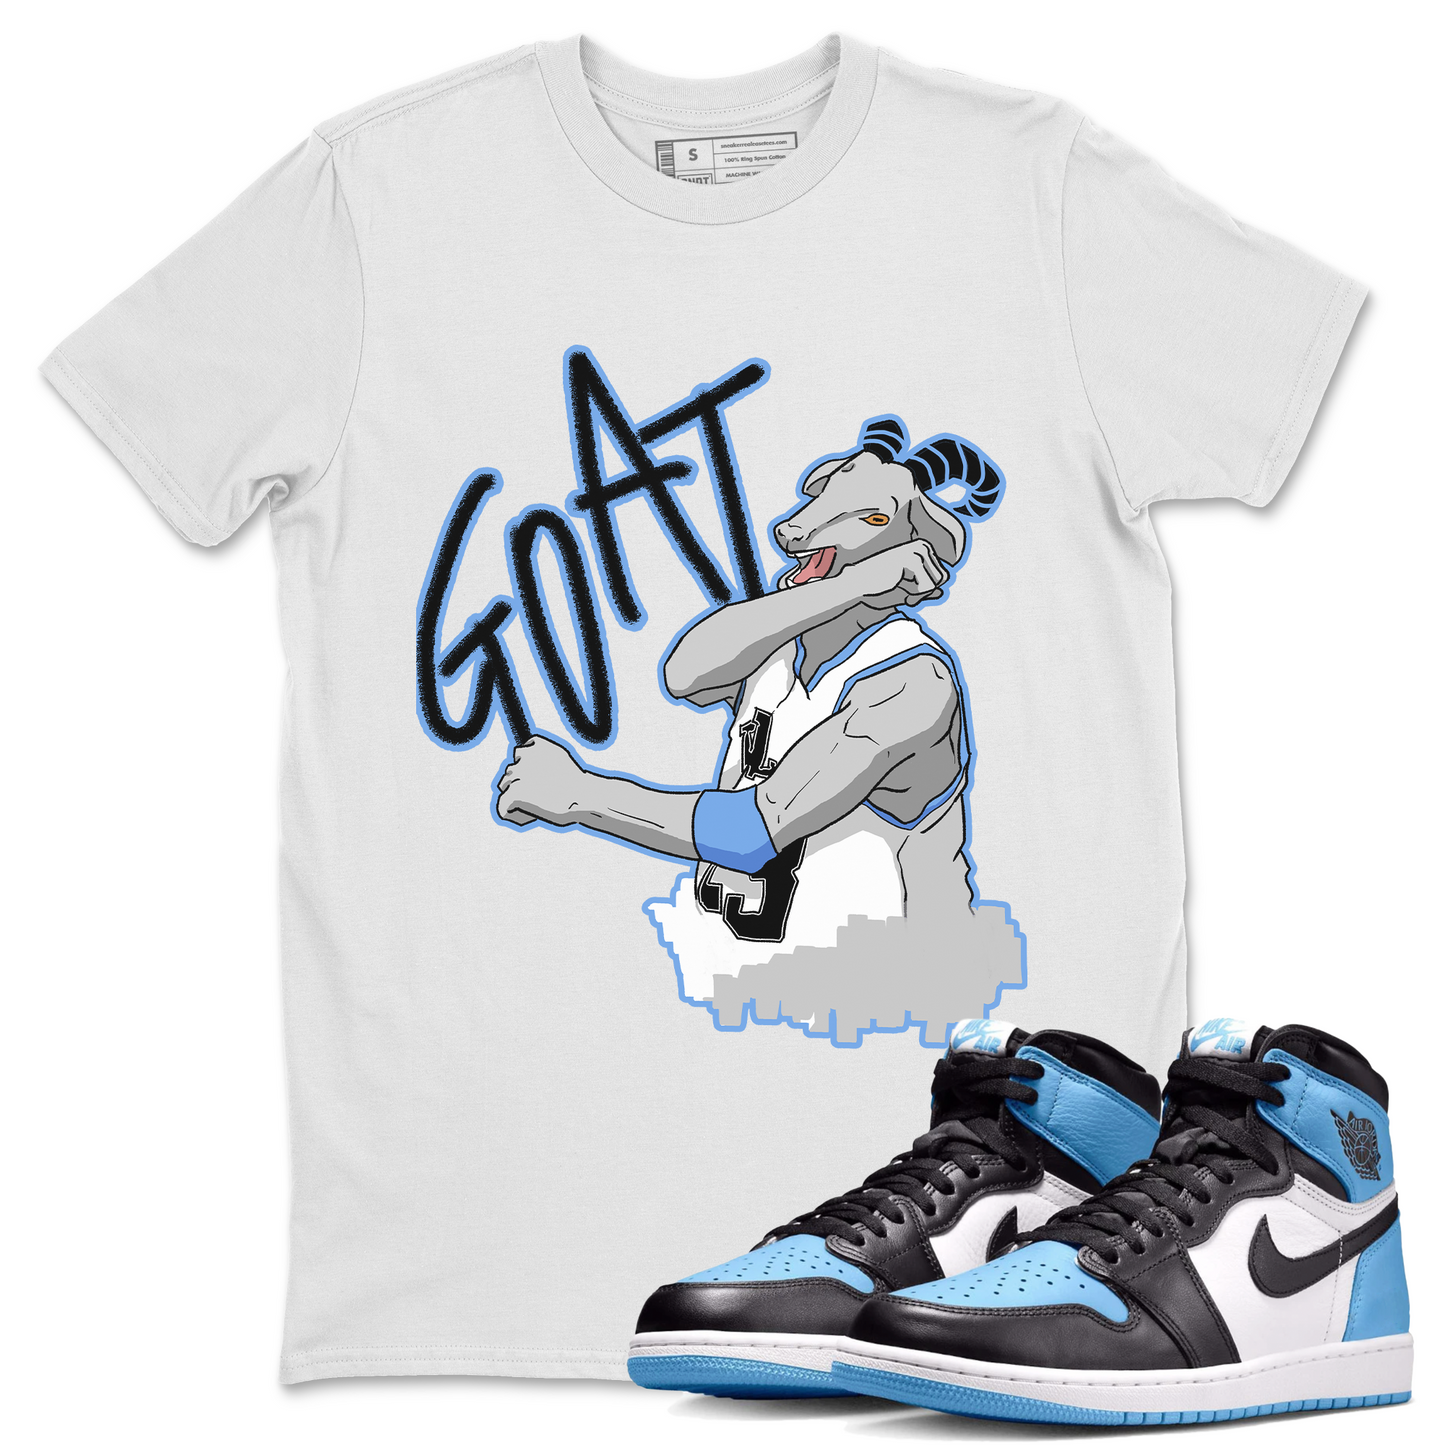 1s University Blue Sneaker Match Tees Screaming Goat Sneaker Tees Air Jordan 1 University Blue Sneaker Release Tees Unisex Shirts White 1